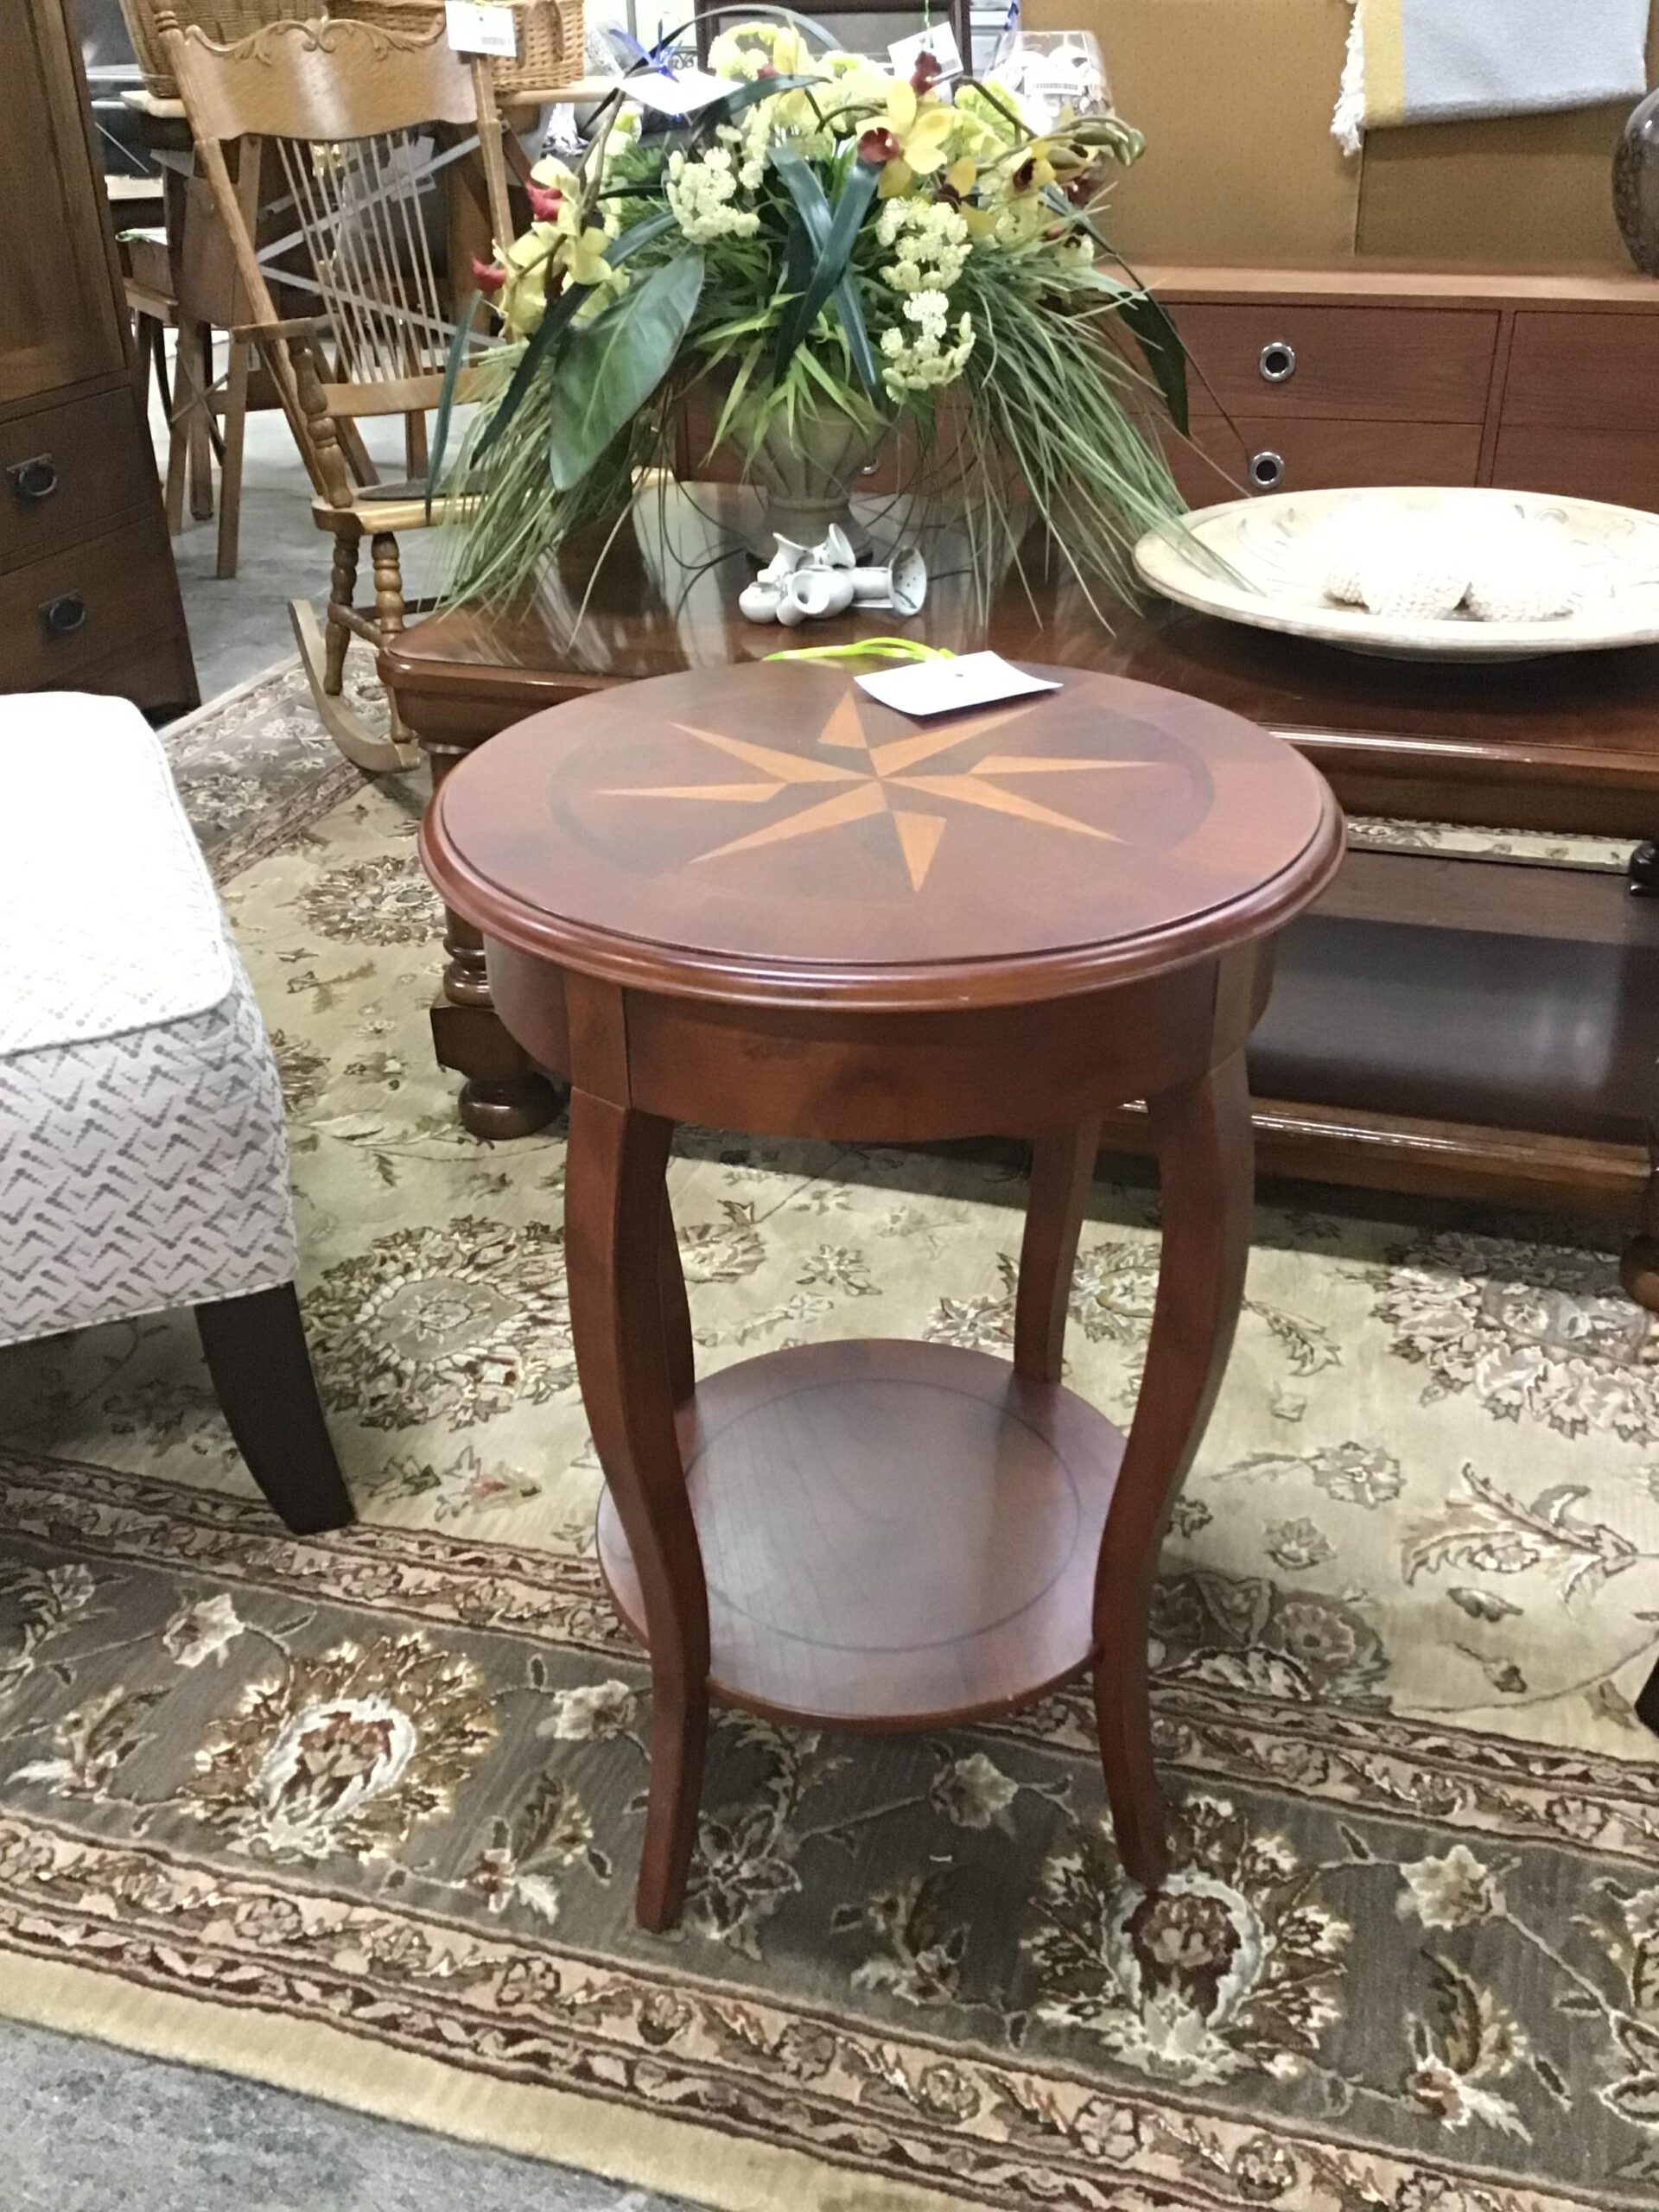 Drk. Wood Inlay “Star” Top Round Side Table